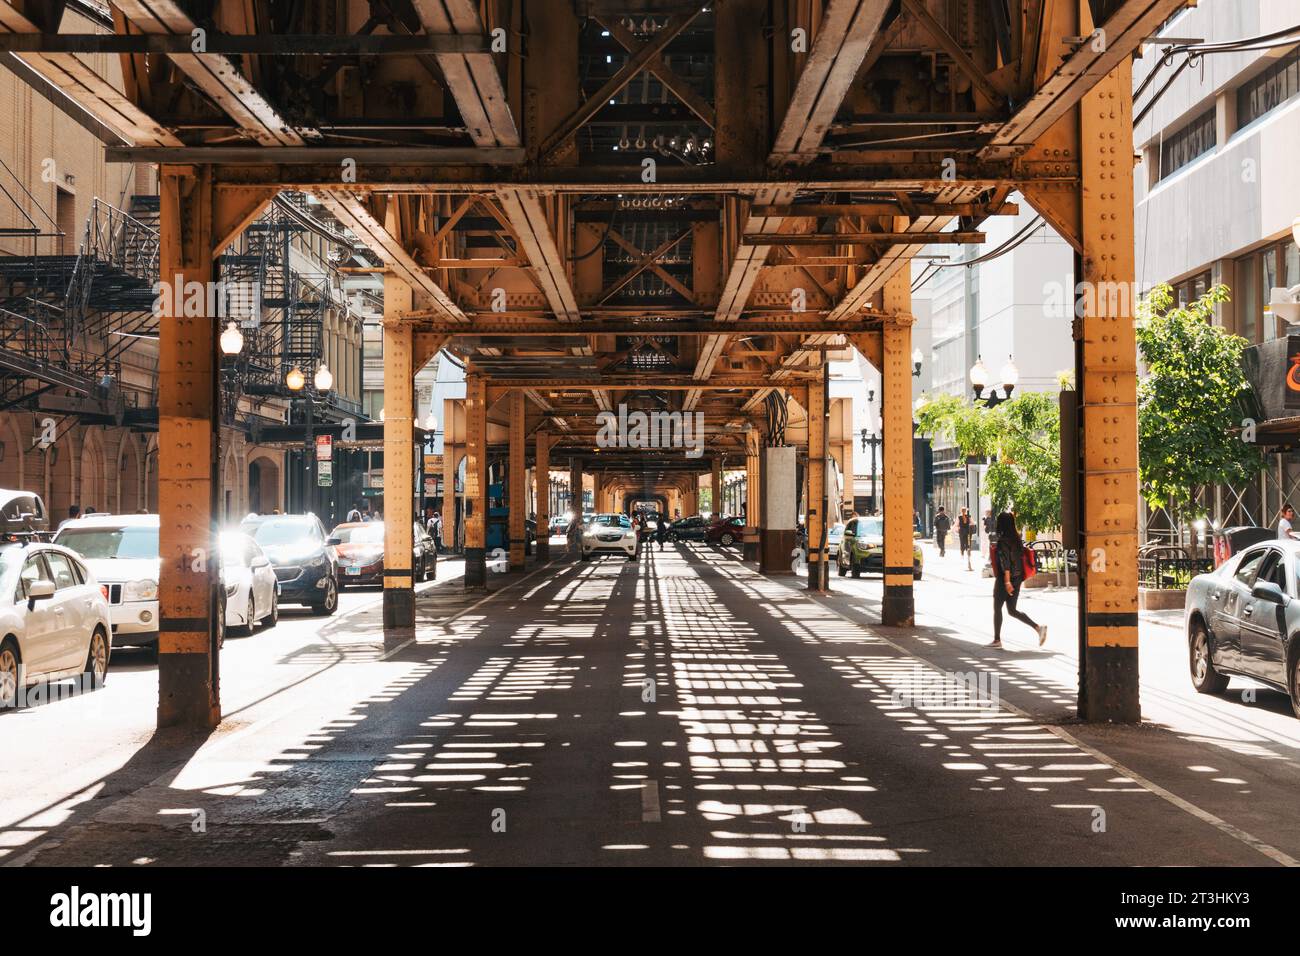 underneath the elevated railway 'L' public transit system in Chicago, United States Stock Photo